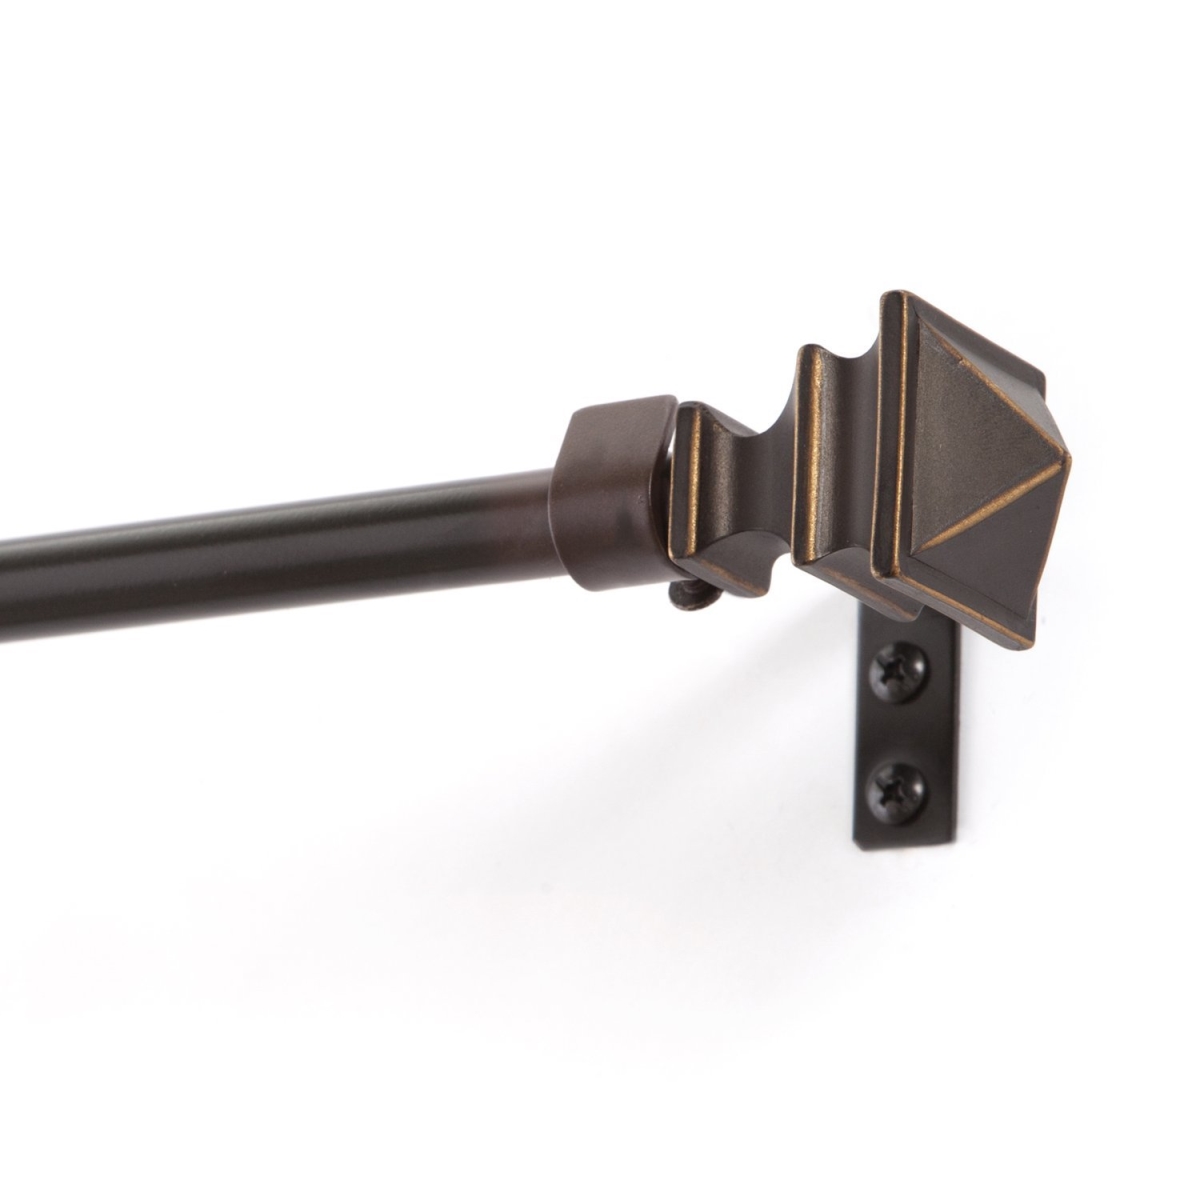 32-lwf1020-2orb 48-88 In. Painted Oil Rubbed Bronze Finish Single Rod Window Hardware With Resin Pierced Finial